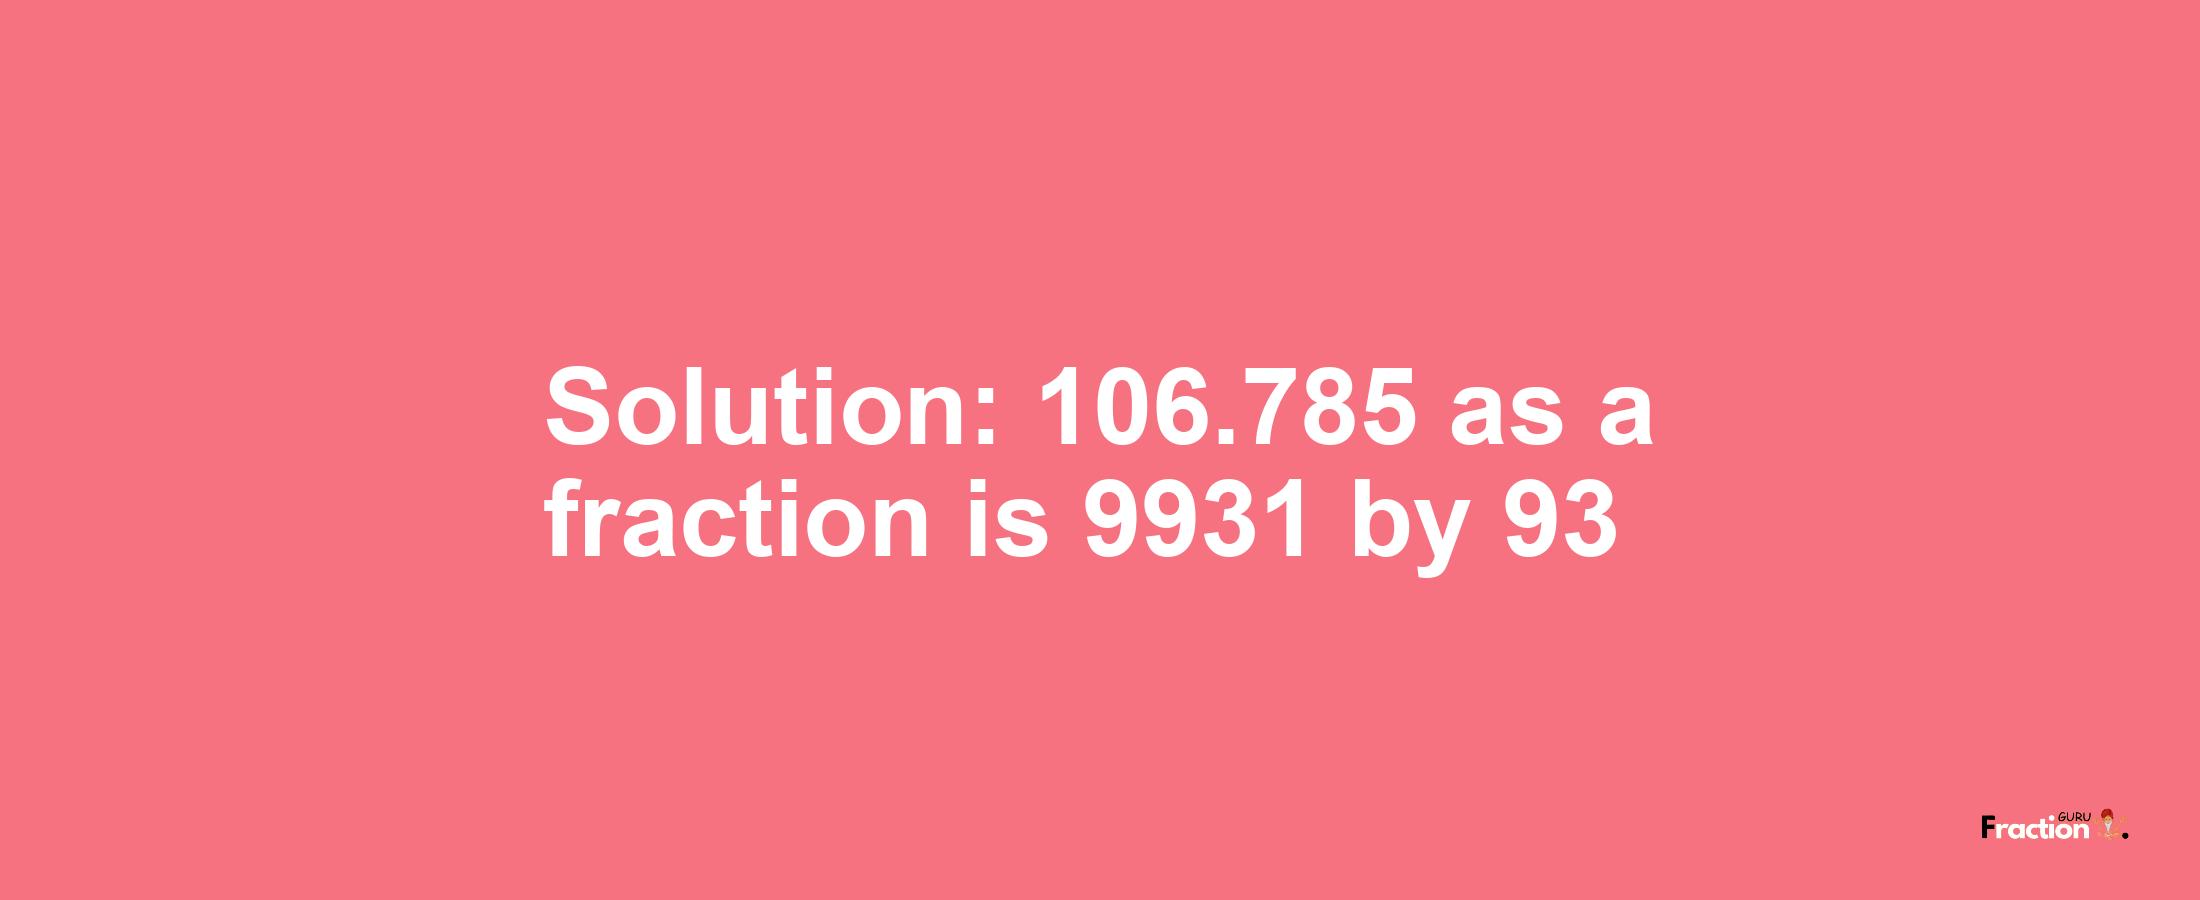 Solution:106.785 as a fraction is 9931/93